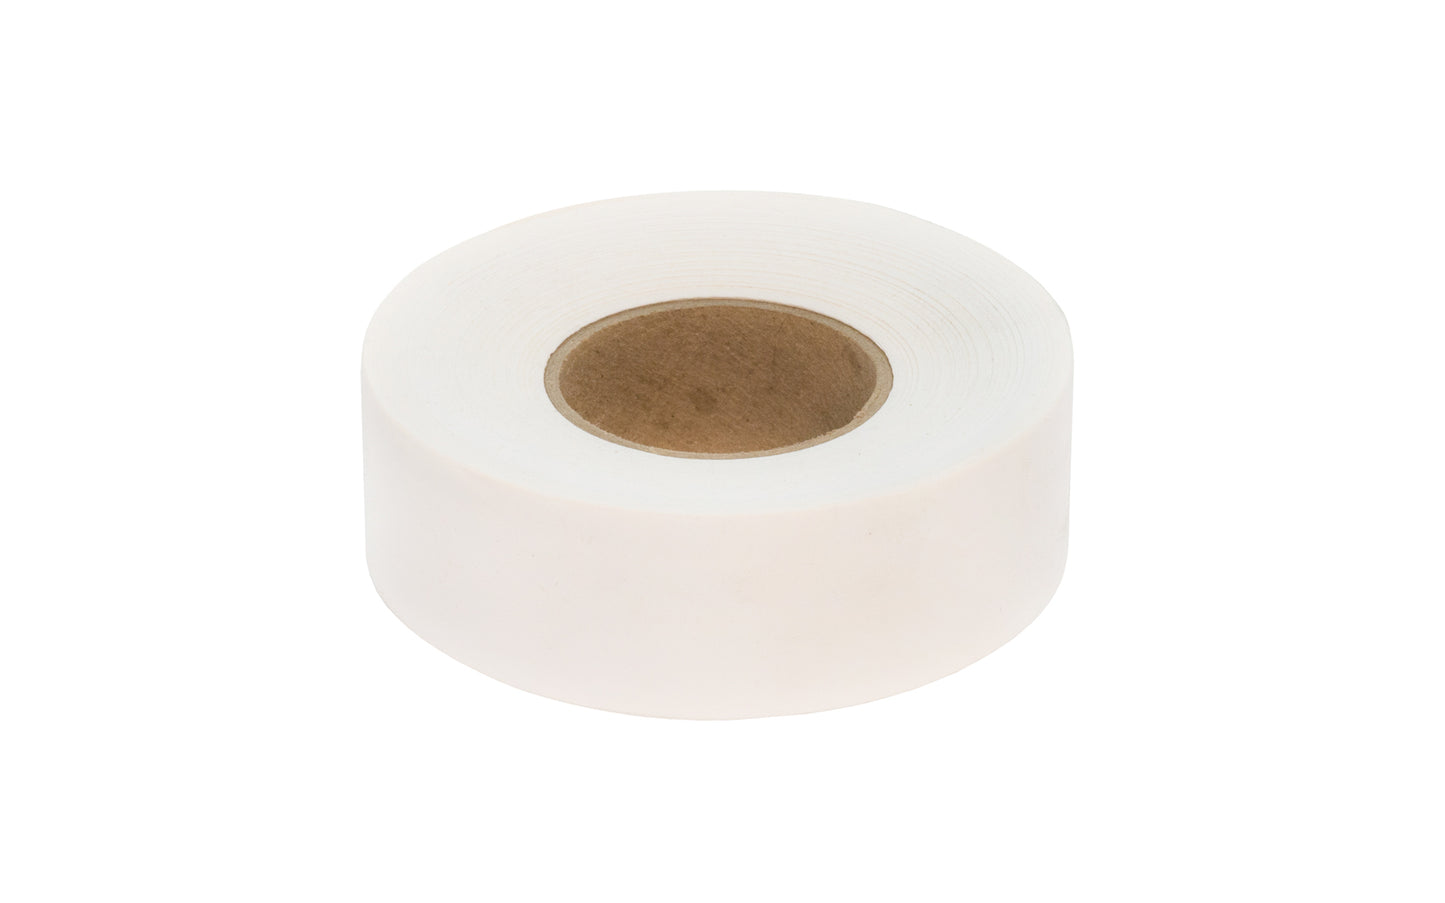 This Swanson White Flagging Tape 1.1875" x 300' is durable plastic tape that remains pliant in cold weather. Easy to tear & tie off. Tape is ideal for marking trails, surveying projects, & similar tasks. Model No. RFTWT300. White Color. 038987633072